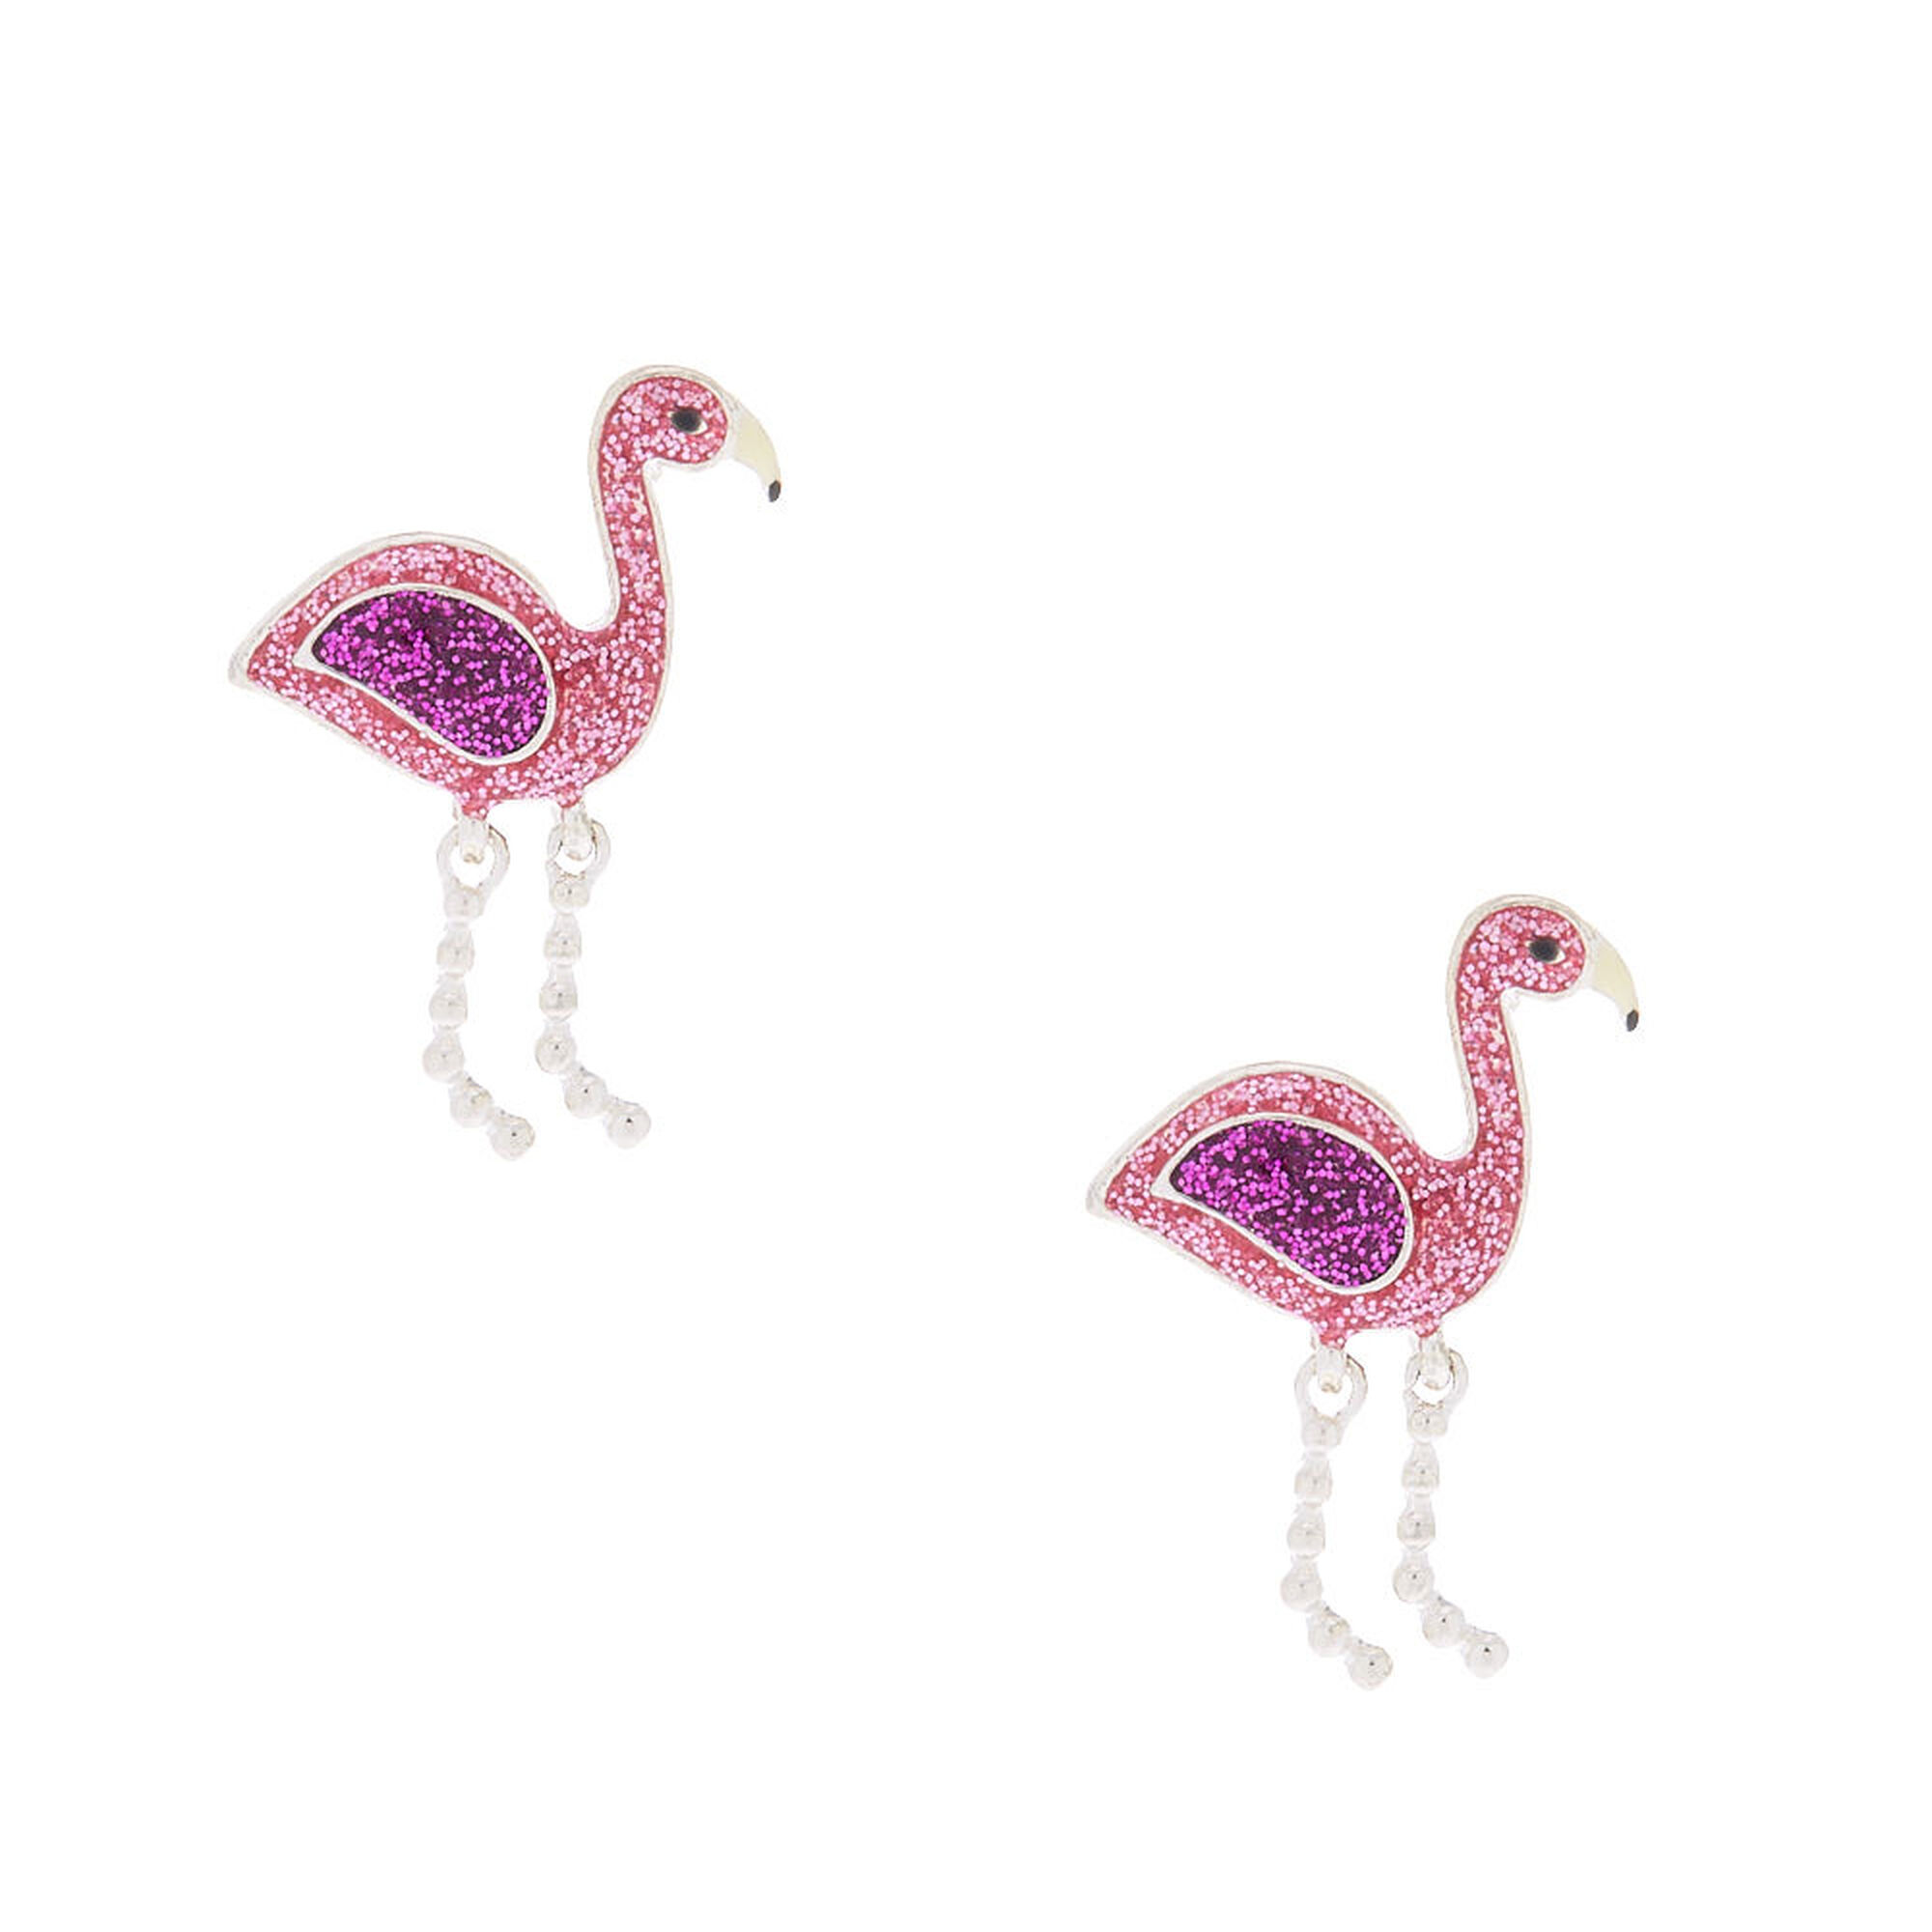 View Claires SilverTone Glitter Flamingo Stud Earrings Pink information